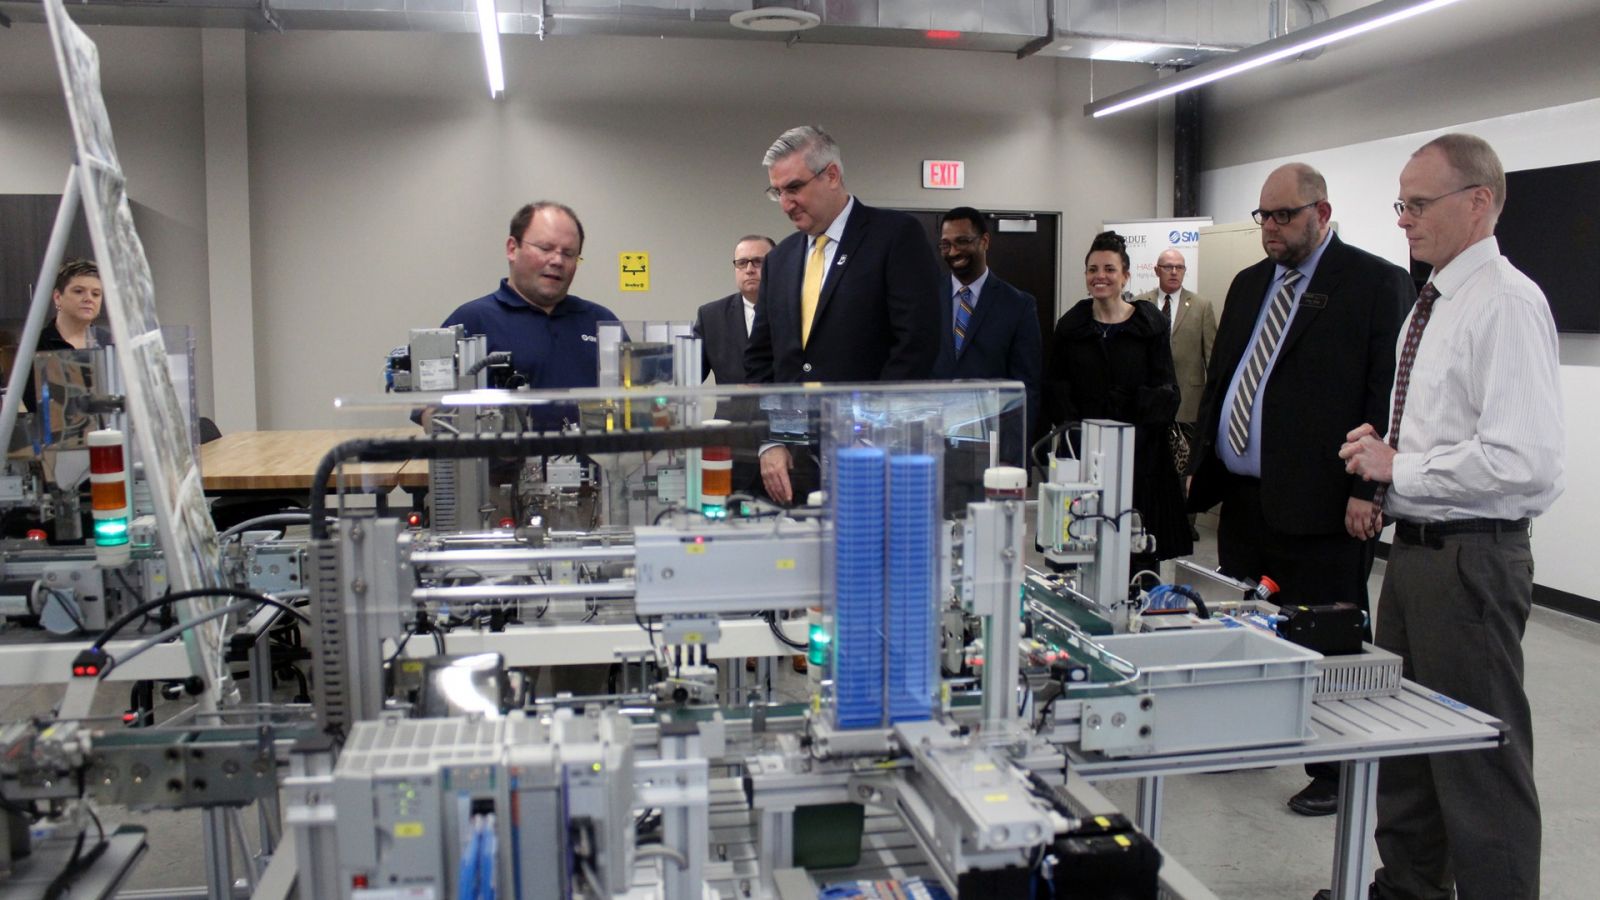 Indiana Governor Holcomb (center) talks with John Wardwell (left), national training manager at SMC Corporation, Corey Sharp (second from right), director of Purdue Polytechnic Anderson, and John Halverson (far right), director of marketing at SMC Corporation, about the SMC HAS 200, a key training system for mechatronics engineering technology students. (Photo courtesy Office of Gov. Holcomb)